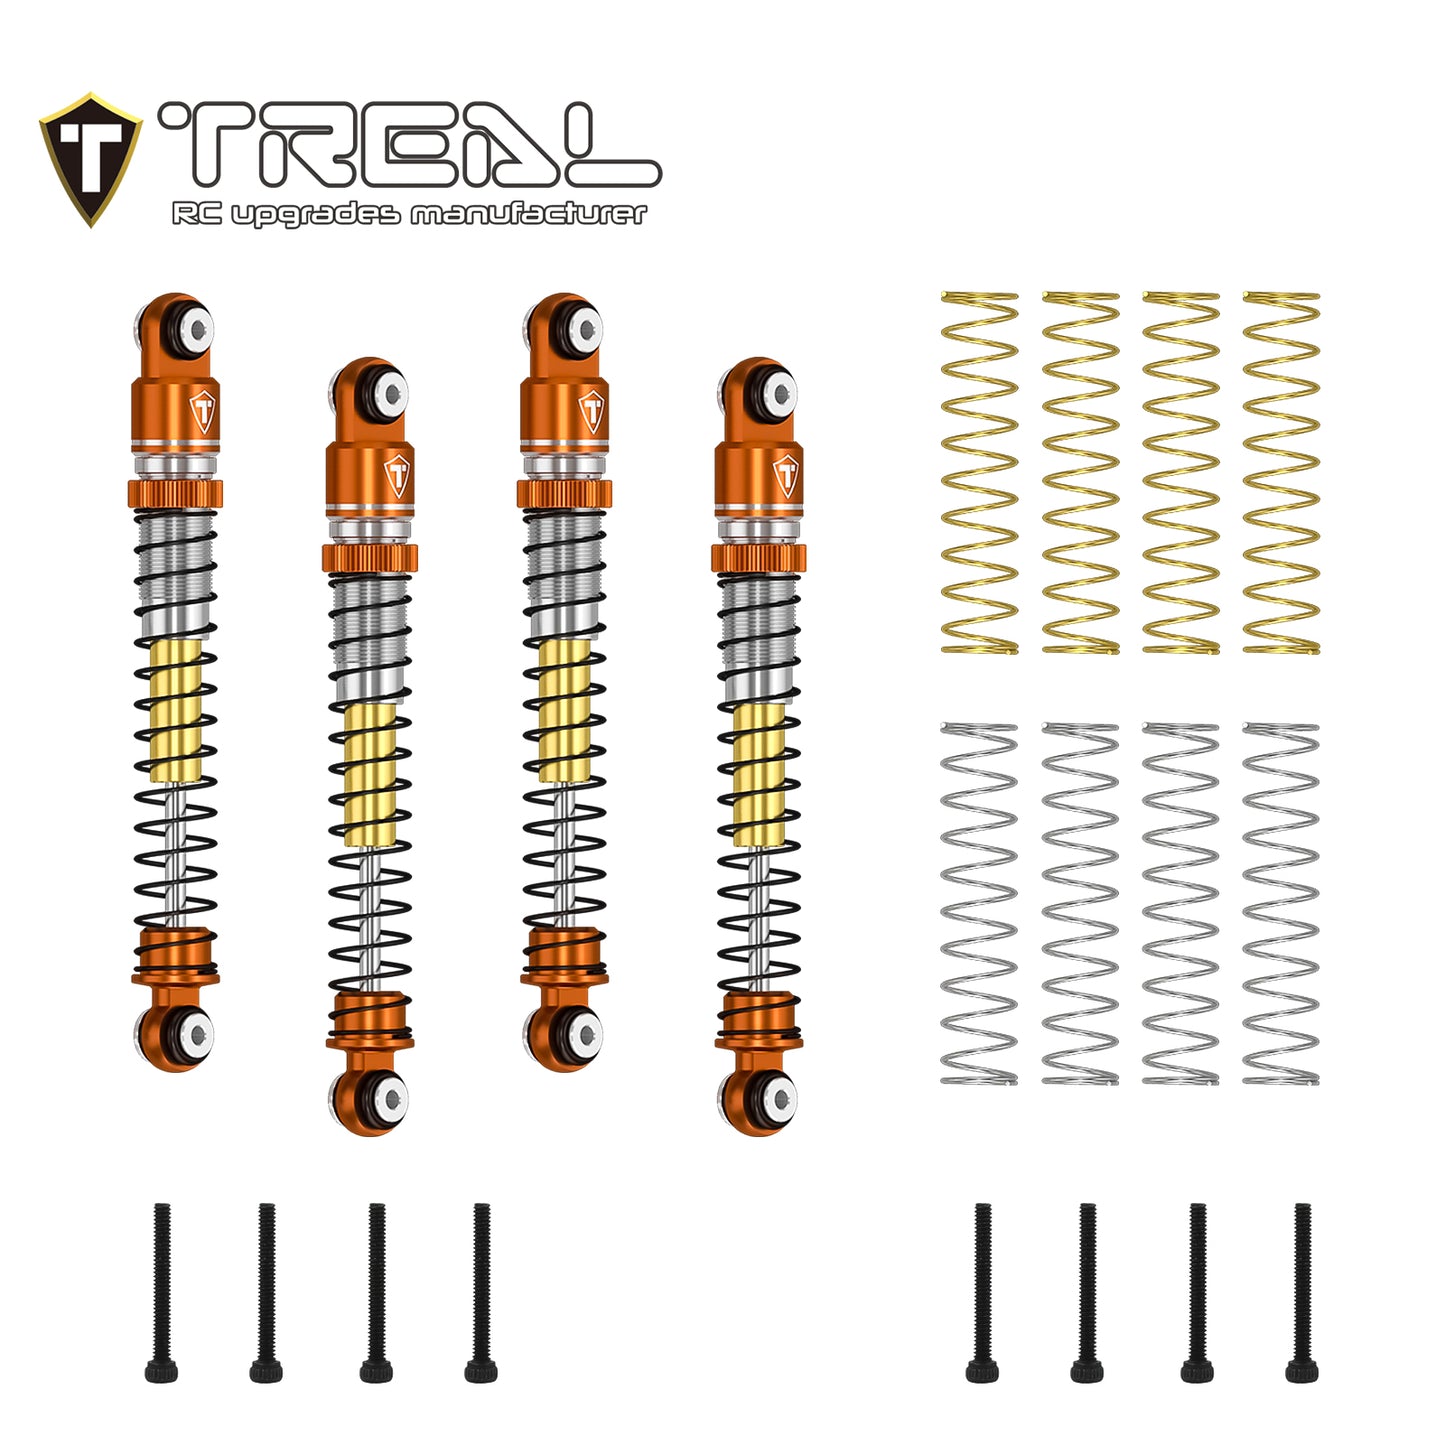 TREAL AX24 Shocks 53mm Aluminum Threaded Shock Adjustable Absorber Oil Damper compatible with 1/24 Axial AX24 XC-1 Upgrades